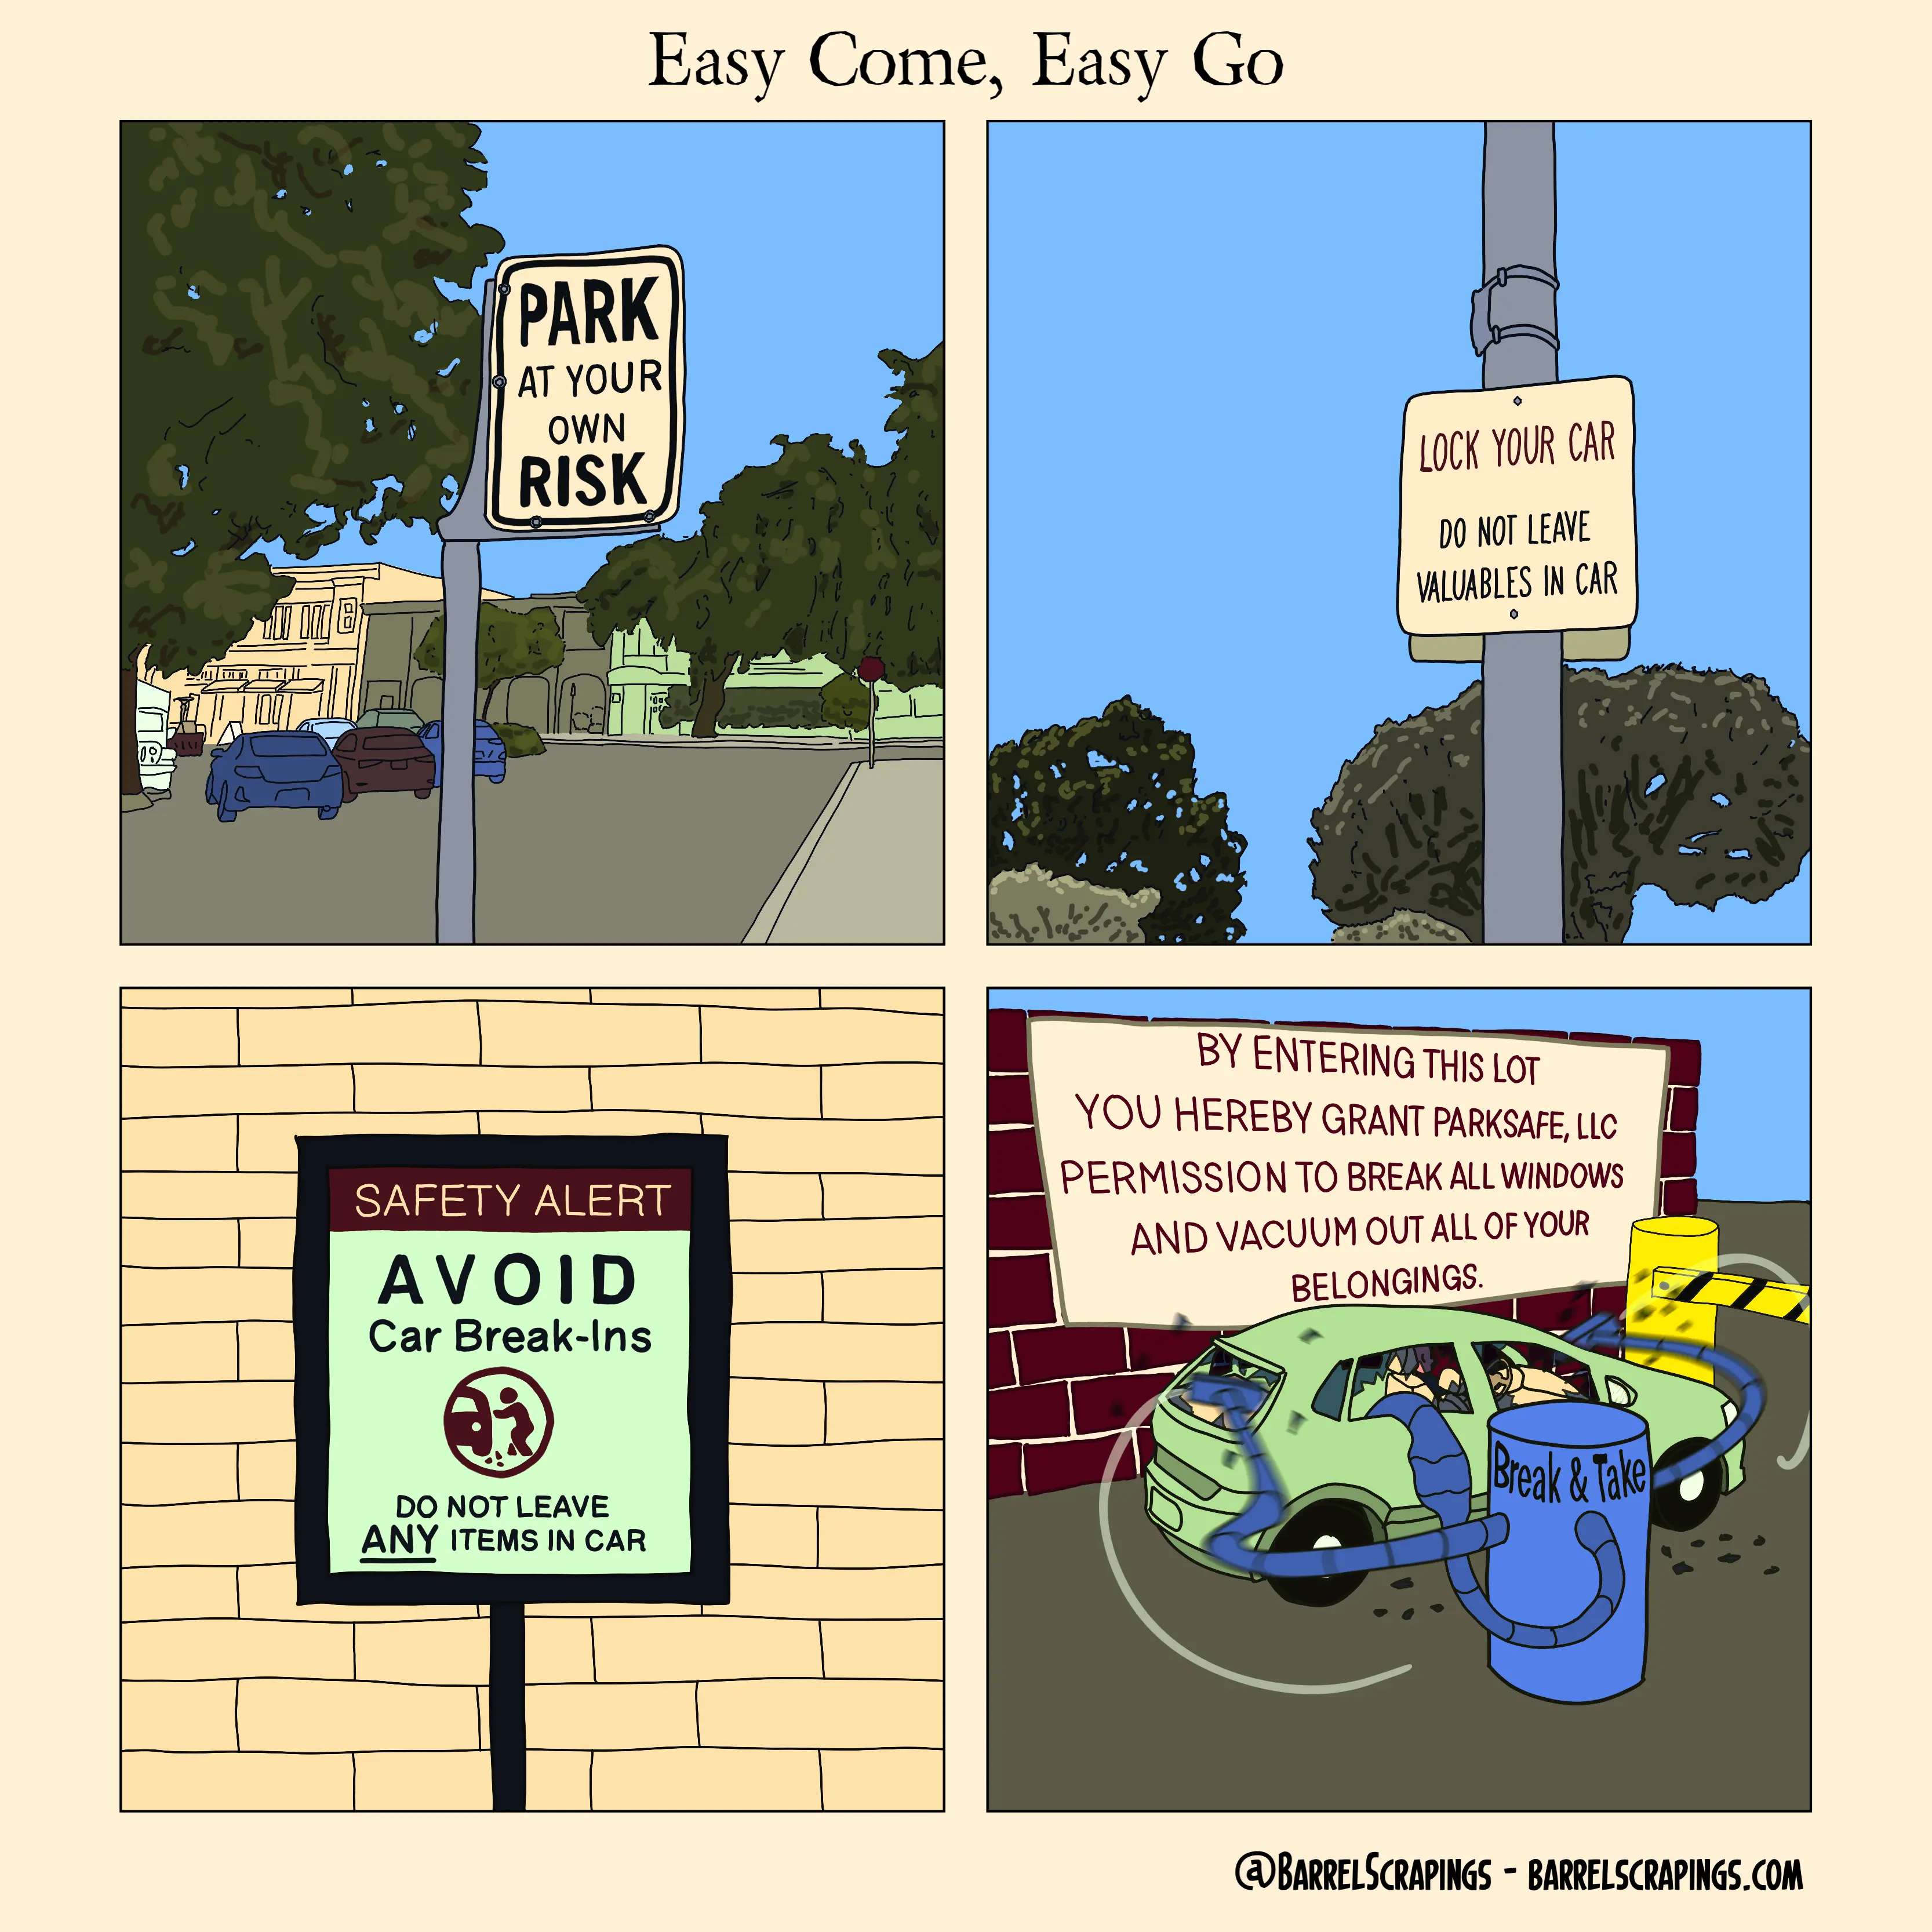 Four panels. Panel 1: City scene (cars in background) with a sign saying "Park at your own risk". Panel 2: Upward perspective of a sign in foreground on a pole saying "Lock your car. Do not leave valuables in car". Trees in the background. Panel 3: A sign in front of a brick wall. Shows a stylized burglar breaking into a car. Text: "Safety Alert. Avoid car break-ins. Do not leave ANY items in car." Panel 4: A car is stopped in front of a parking turnstile. In the background is a brick wall and a sign saying, "By entering this lot you hereby grant Parksafe, LLC permission to break all windows and vacuum out all of your belongings." In the foreground a machine with the label "Break & Take" is smashing all of the windows, glas sis flying. A vacuum hose shows a distended shape, clearly sucking something into it. Driver looks undisturbed in the front seat.